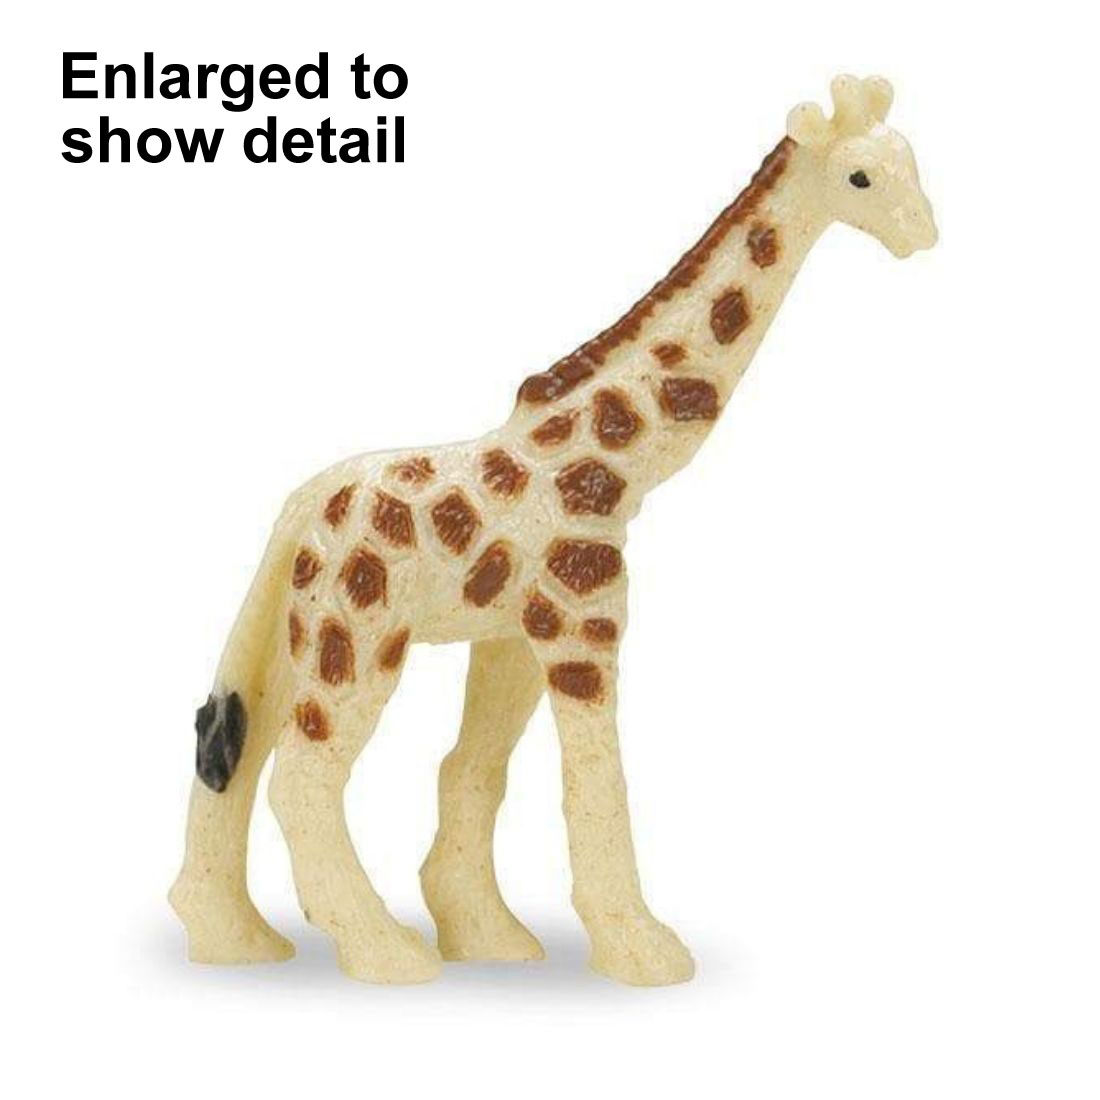 Giraffe Mini Figurine with the text Enlarged to Show Detail